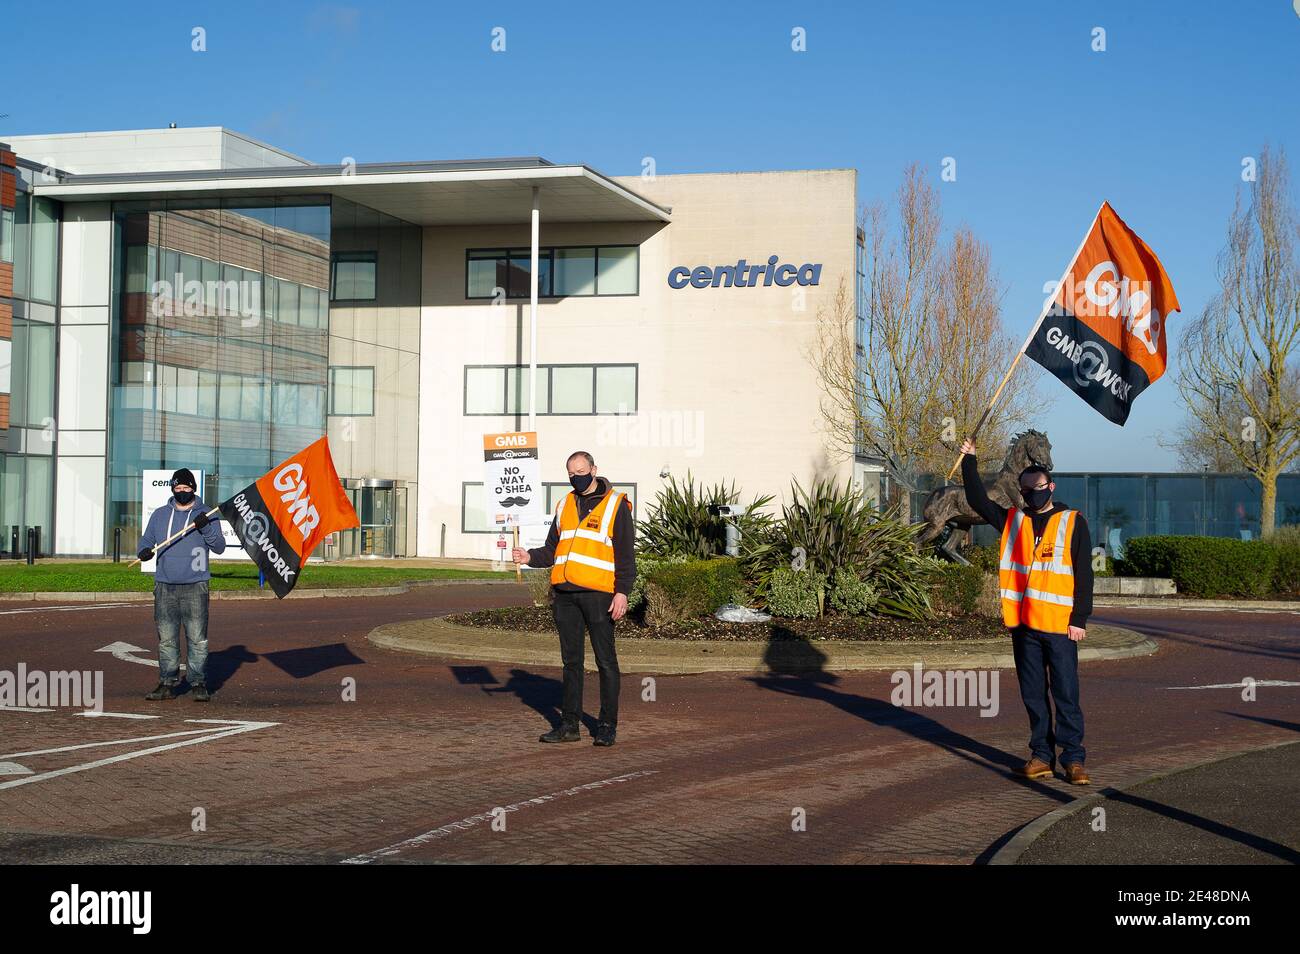 Windsor, Berkshire, UK. 22nd January, 2021. Day six of the British Gas strike was ‘rock solid’ as an estimated 7,000 workers downed tools over the company’s plan to sack them all. This morning British Gas Engineers burnt their “sign or be fired” contracts outside the head office of parent company Centrica. British Gas engineers and staff voted overwhelmingly by 89%  to strike after the boss of parent company Centrica Chris O’Shea, threatened to fire them all if they didn’t “accept” cuts to pay and terms and conditions. Credit: Maureen McLean/Alamy Live News Stock Photo